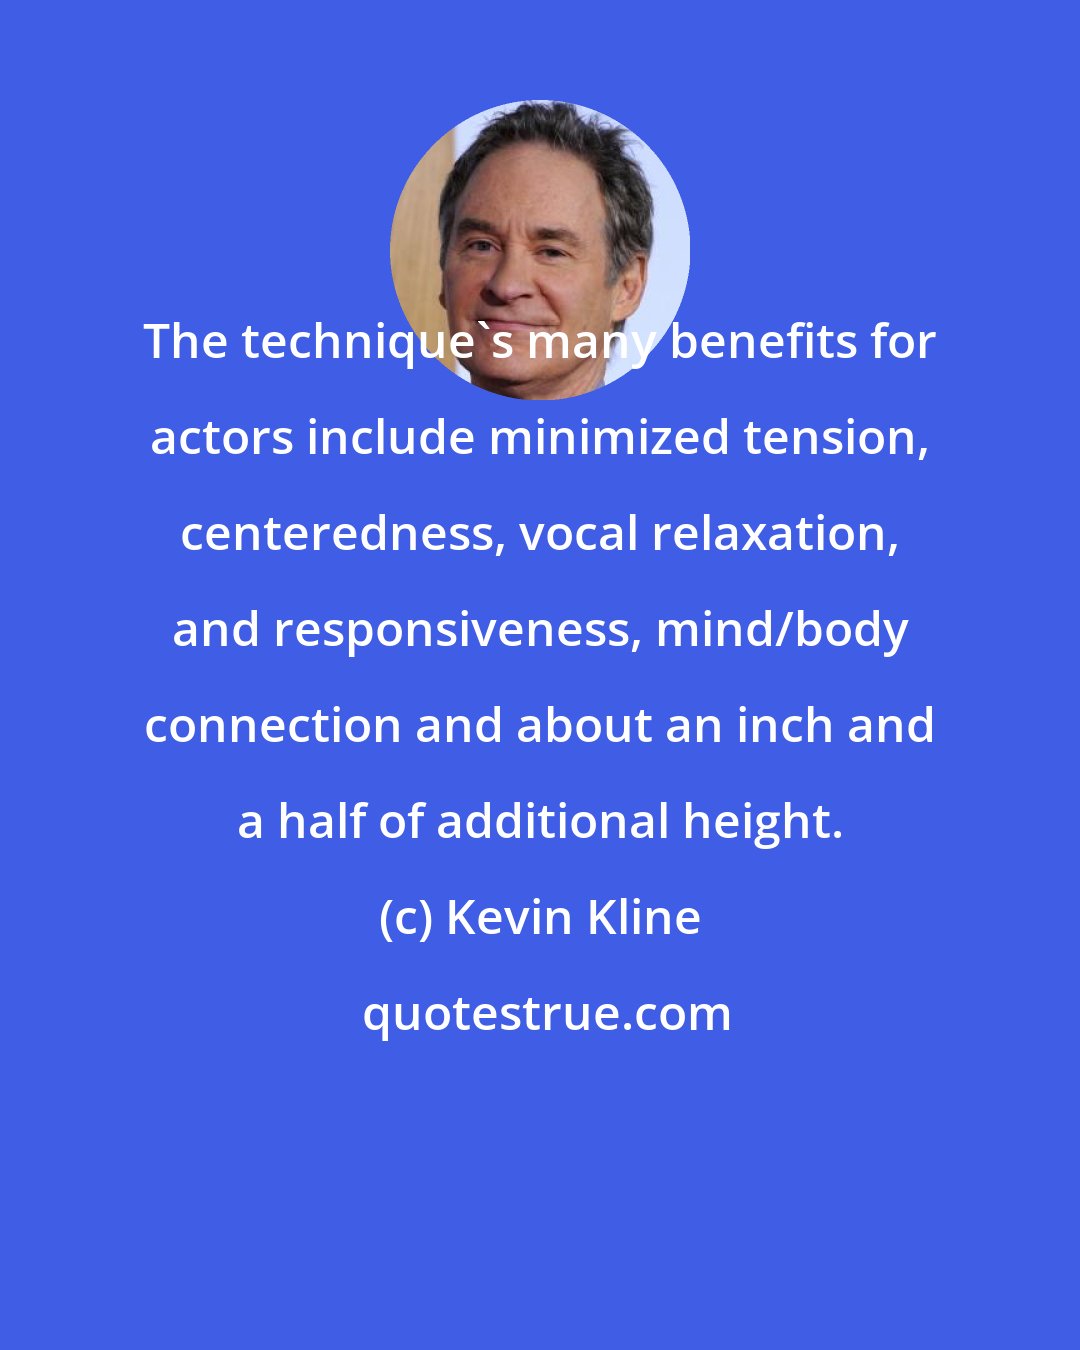 Kevin Kline: The technique's many benefits for actors include minimized tension, centeredness, vocal relaxation, and responsiveness, mind/body connection and about an inch and a half of additional height.